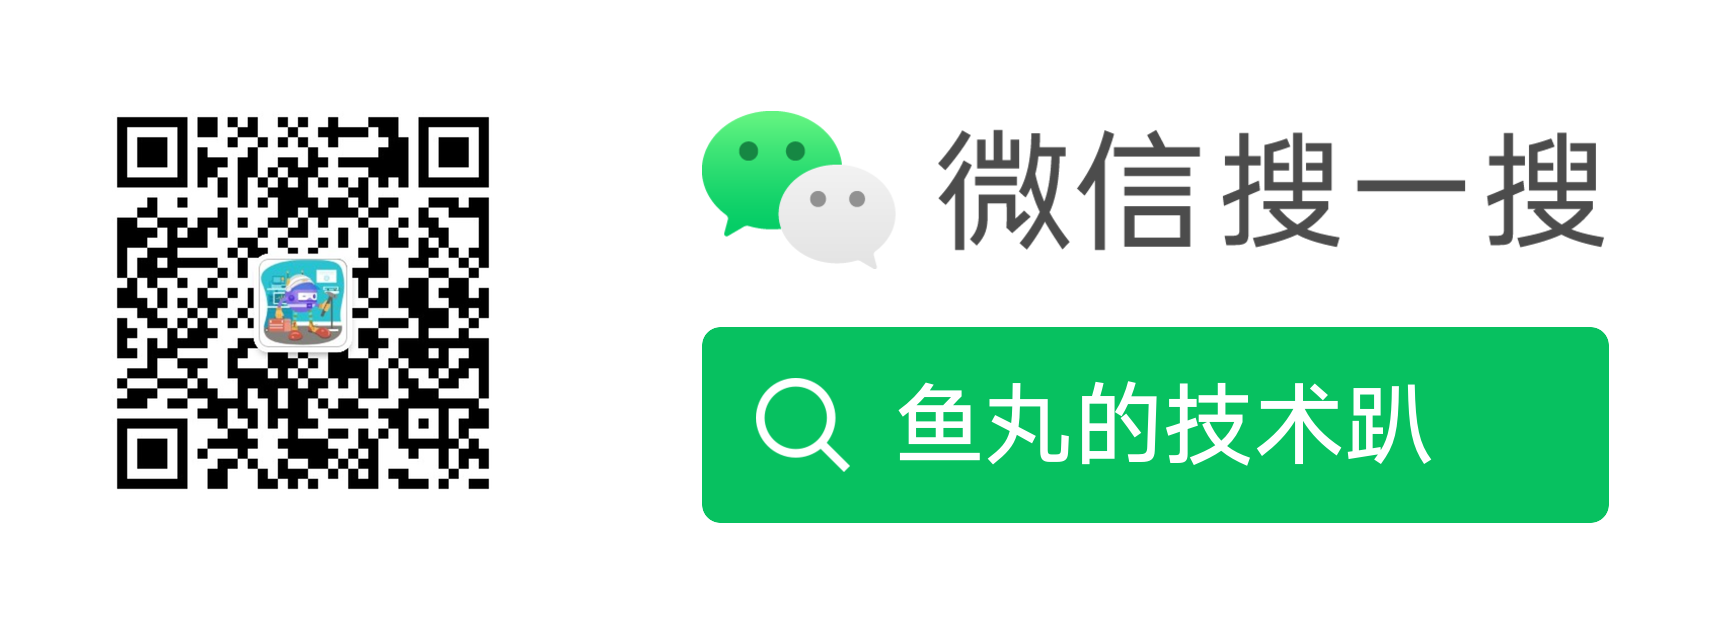 wechat-official-account.png